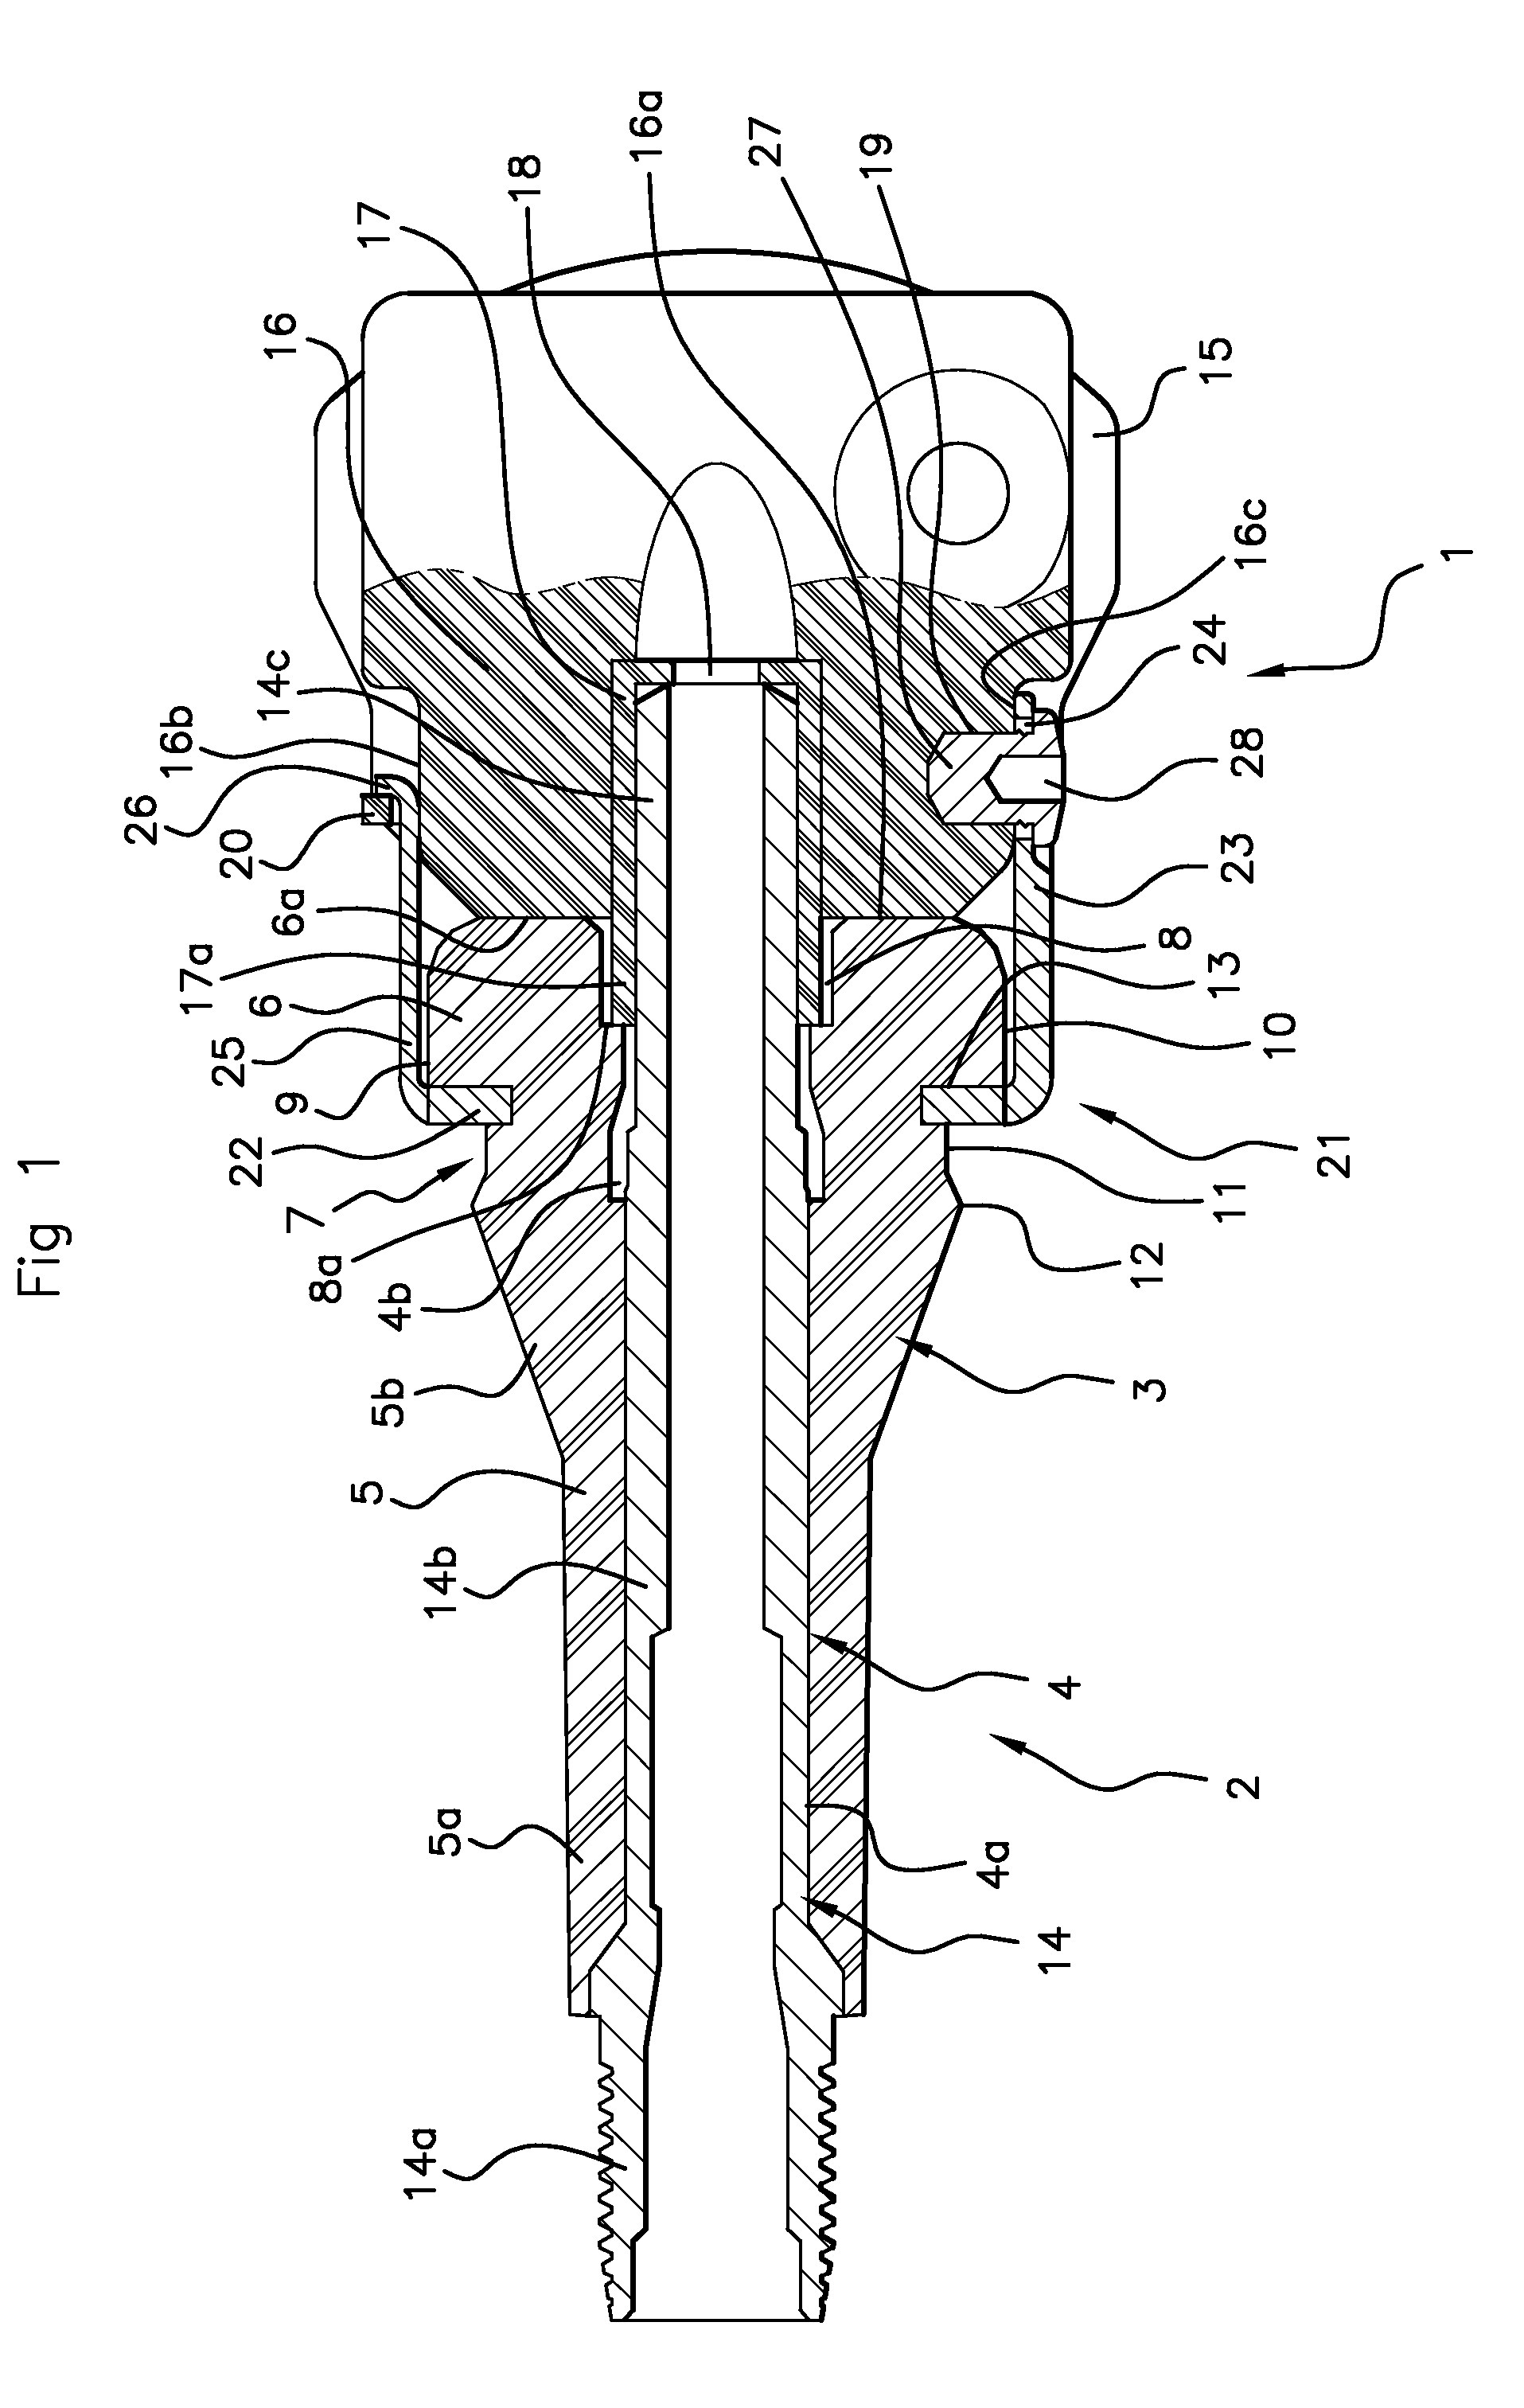 Electronic unit for measuring working parameters of a vehicle wheel